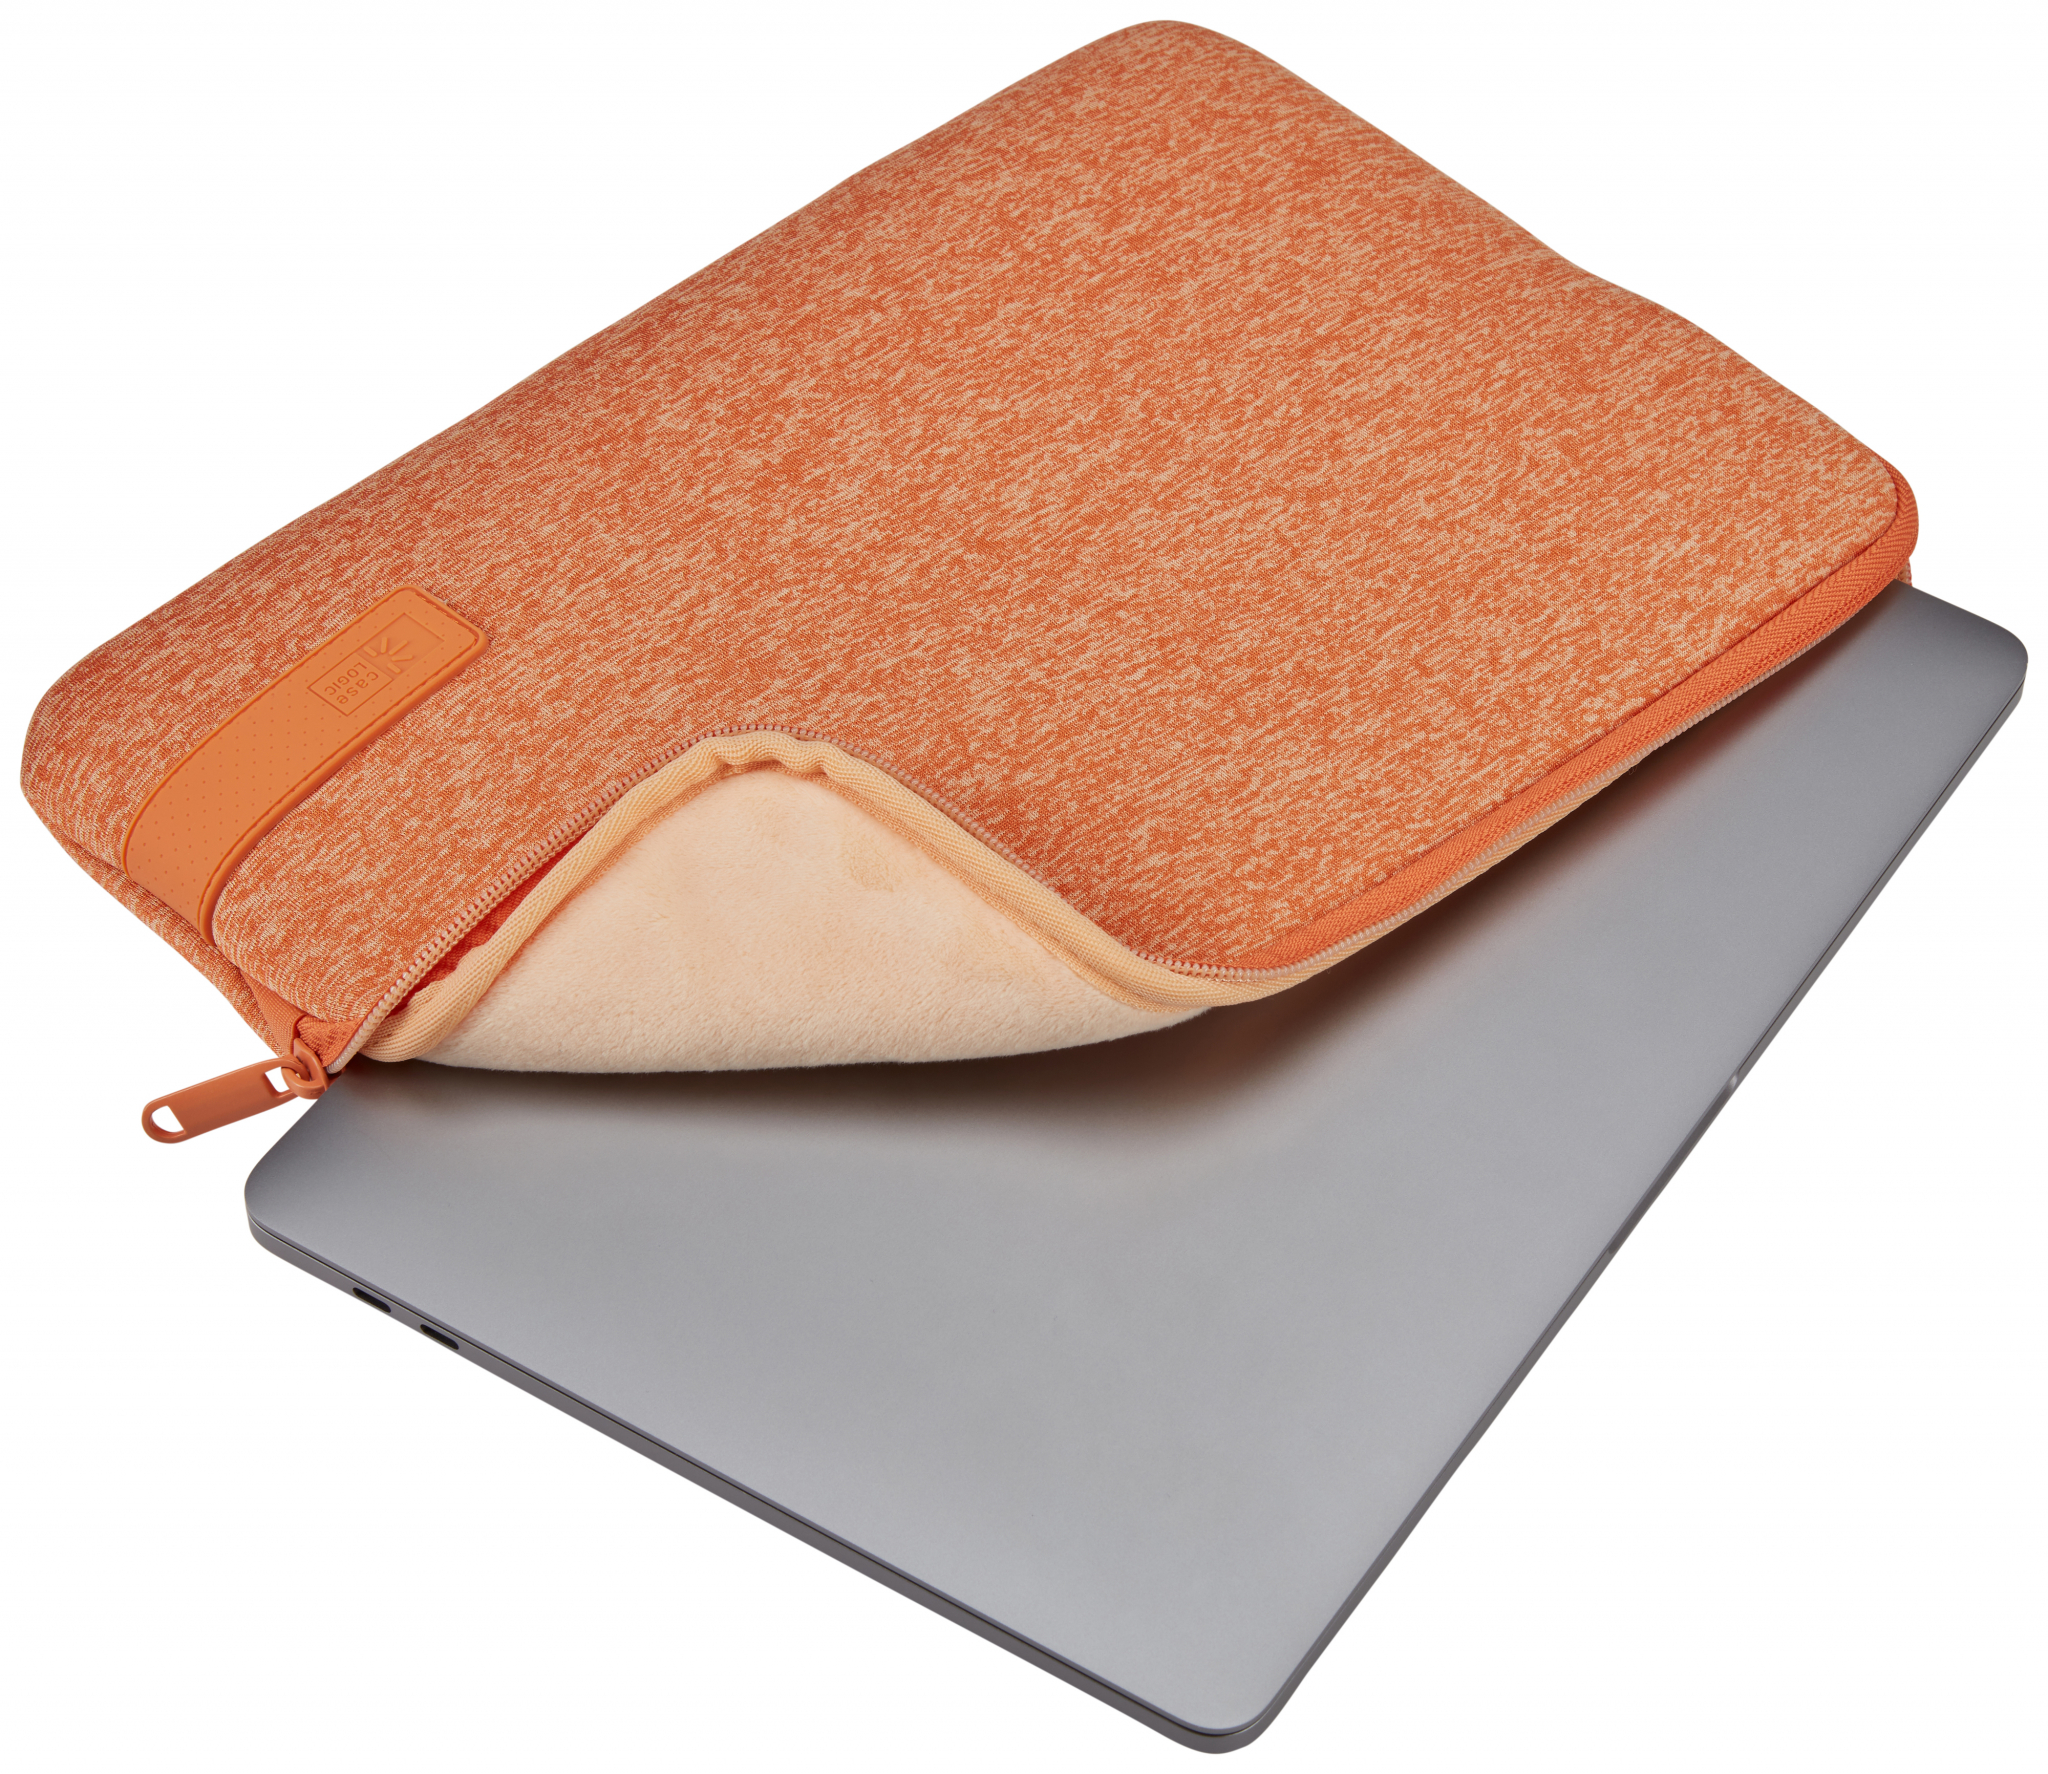 Polyester, Reflect LOGIC Universal für Gold/Apricot Coral Notebooksleeve Sleeve CASE